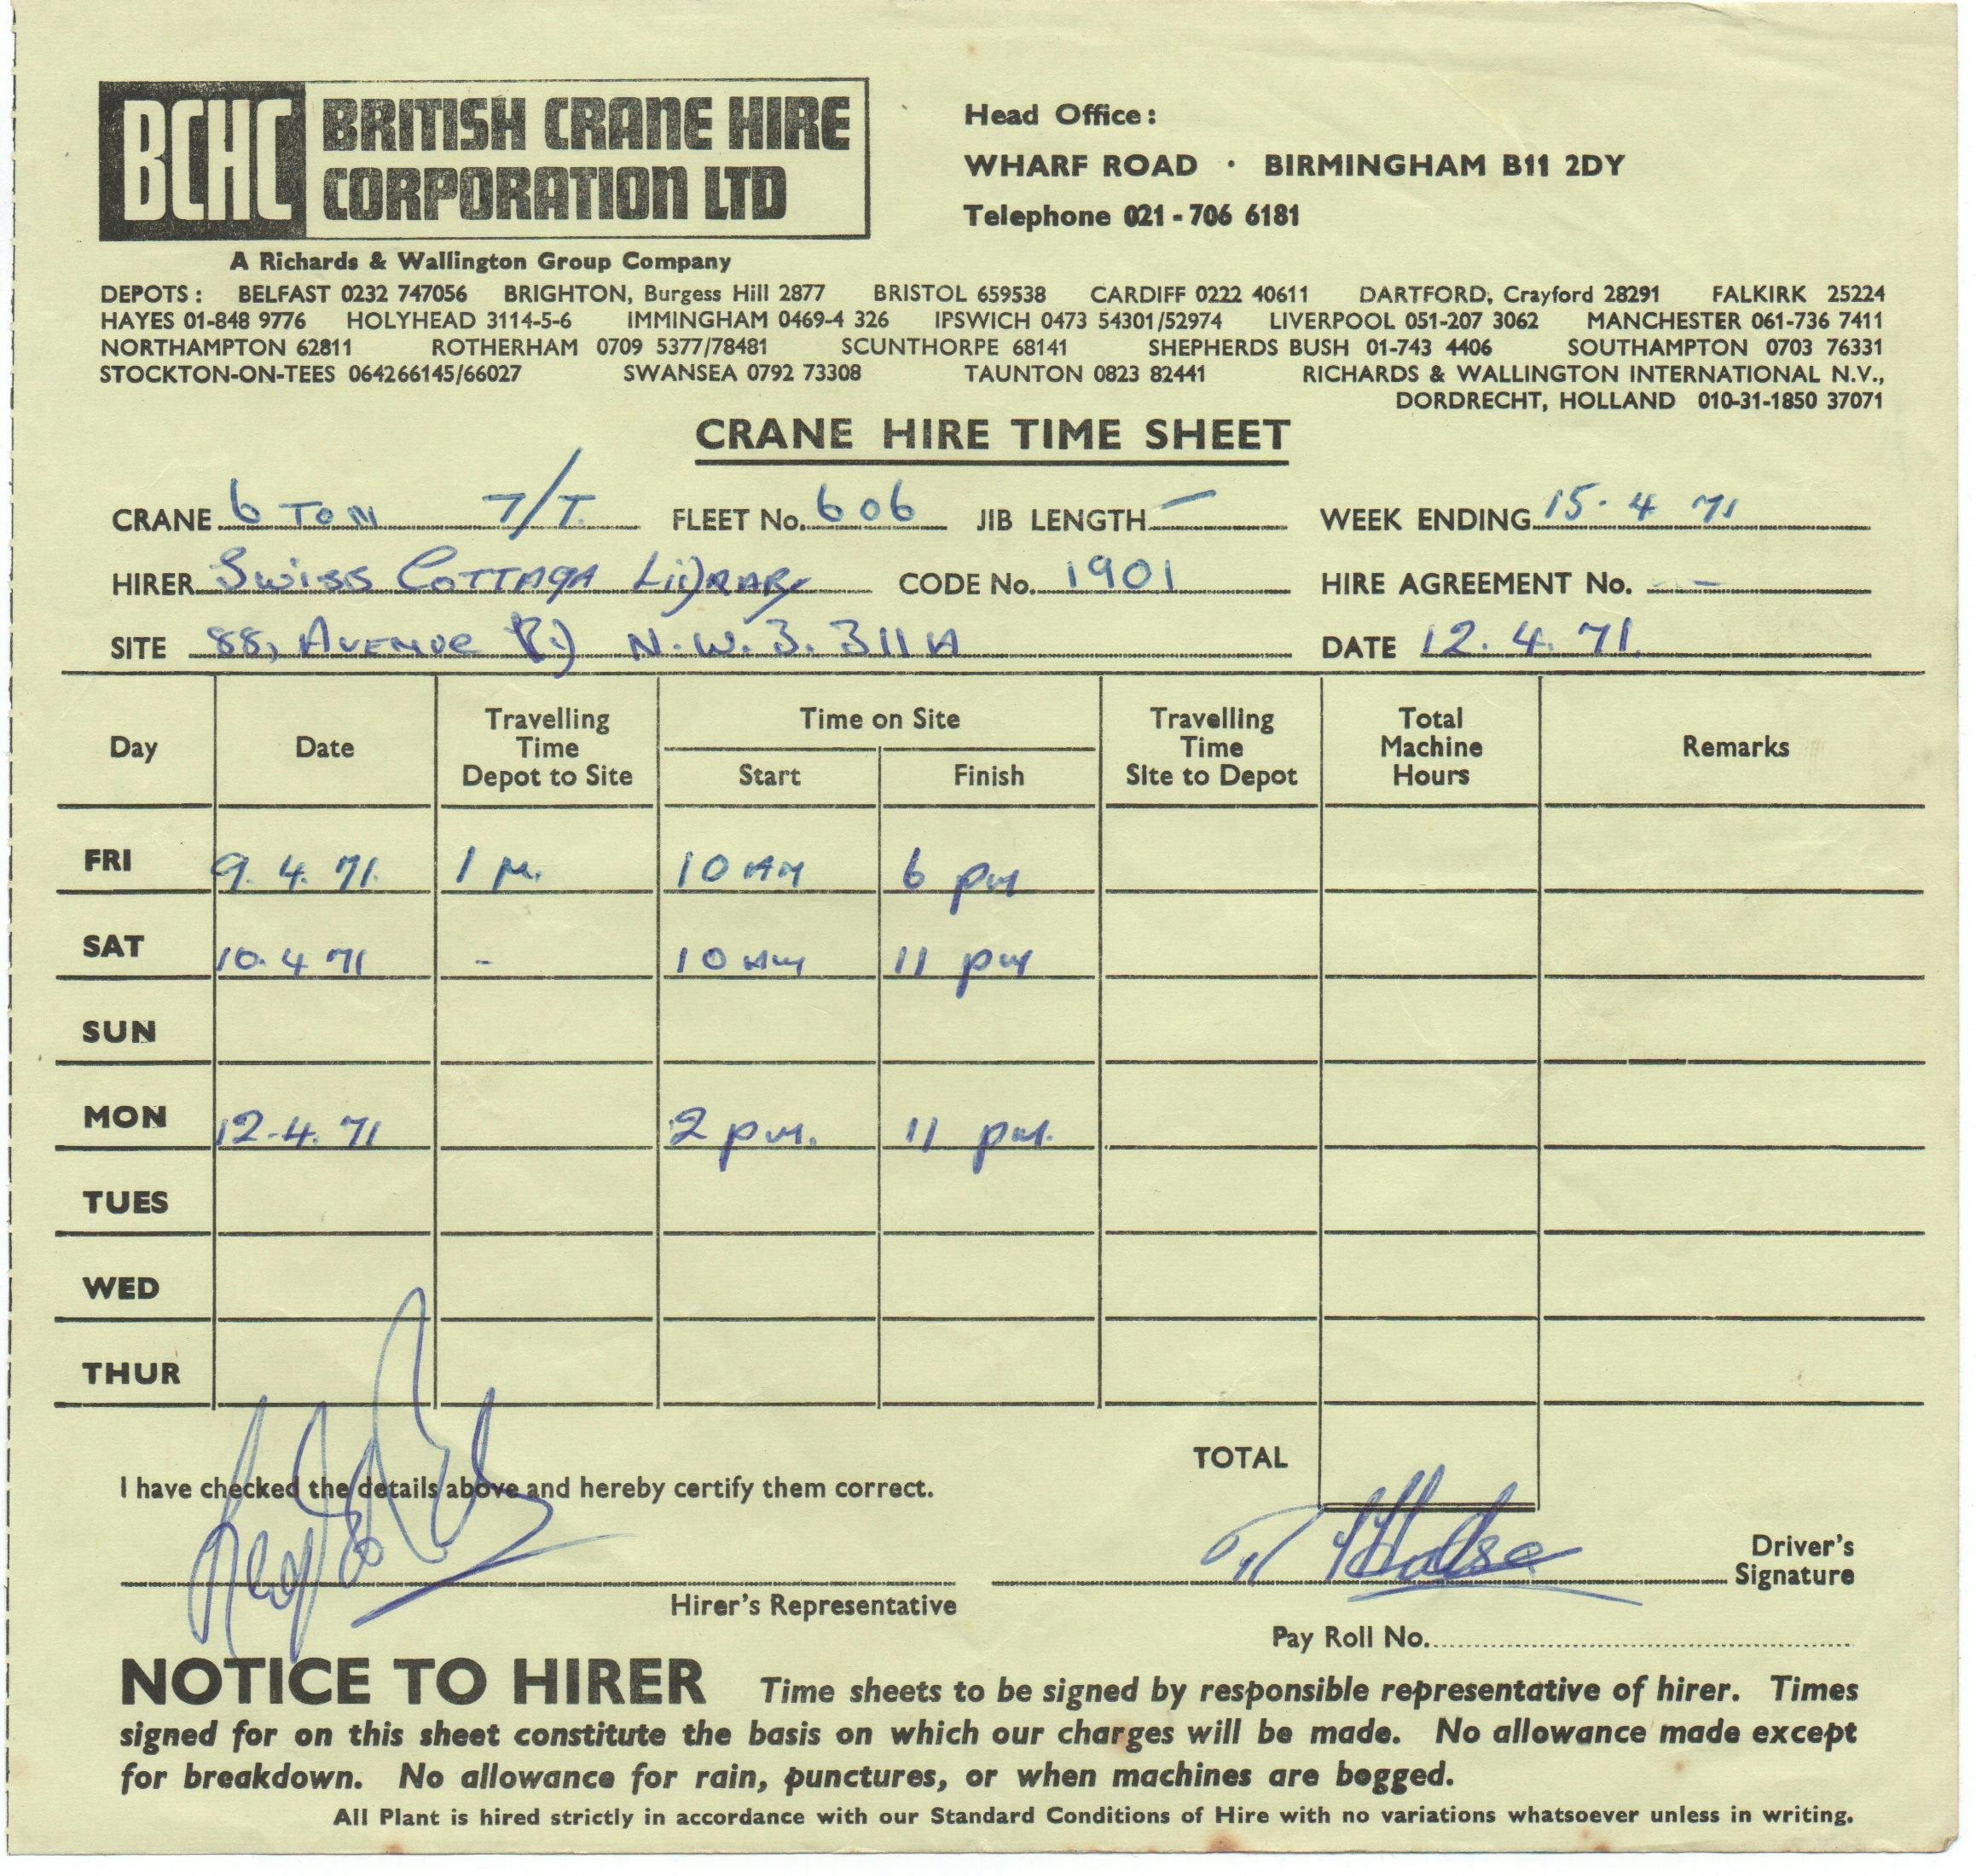 The image shows a time sheet from the British Crane Hire Corporation Ltd printed on green square paper. The “Crane Hire Time Sheet” is filled out with blue ink by a hirer, the Swiss Cottage Library, to hire a six-ton crane for the Friday, Saturday, and Monday of the week ending April 15, 1971. On Friday, the crane was reserved from 10 a.m. to 6 p.m., on Saturday from 10 a.m. to 11 p.m., and on Monday from 2 p.m. to 11 p.m. At the lower left, in the space designated for the “Hirer’s Representative,” Leopoldo Maler’s signature appears.